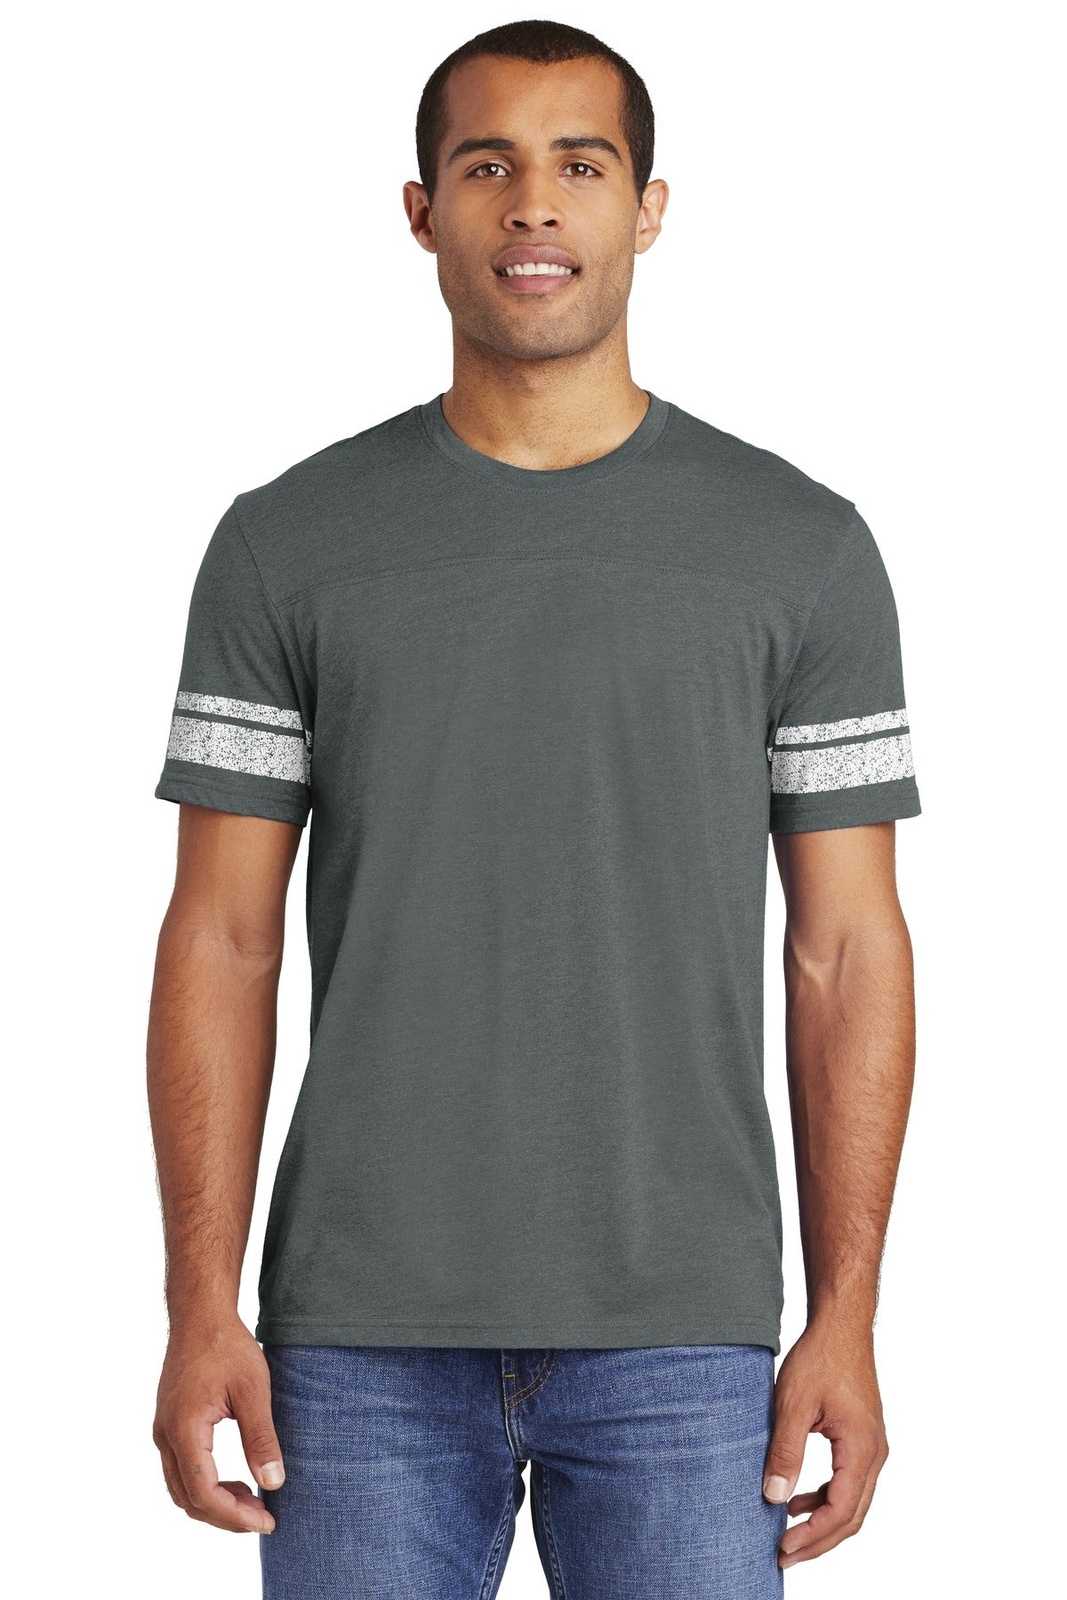 District DT376 Game Tee - Heathered Charcoal White - HIT a Double - 1